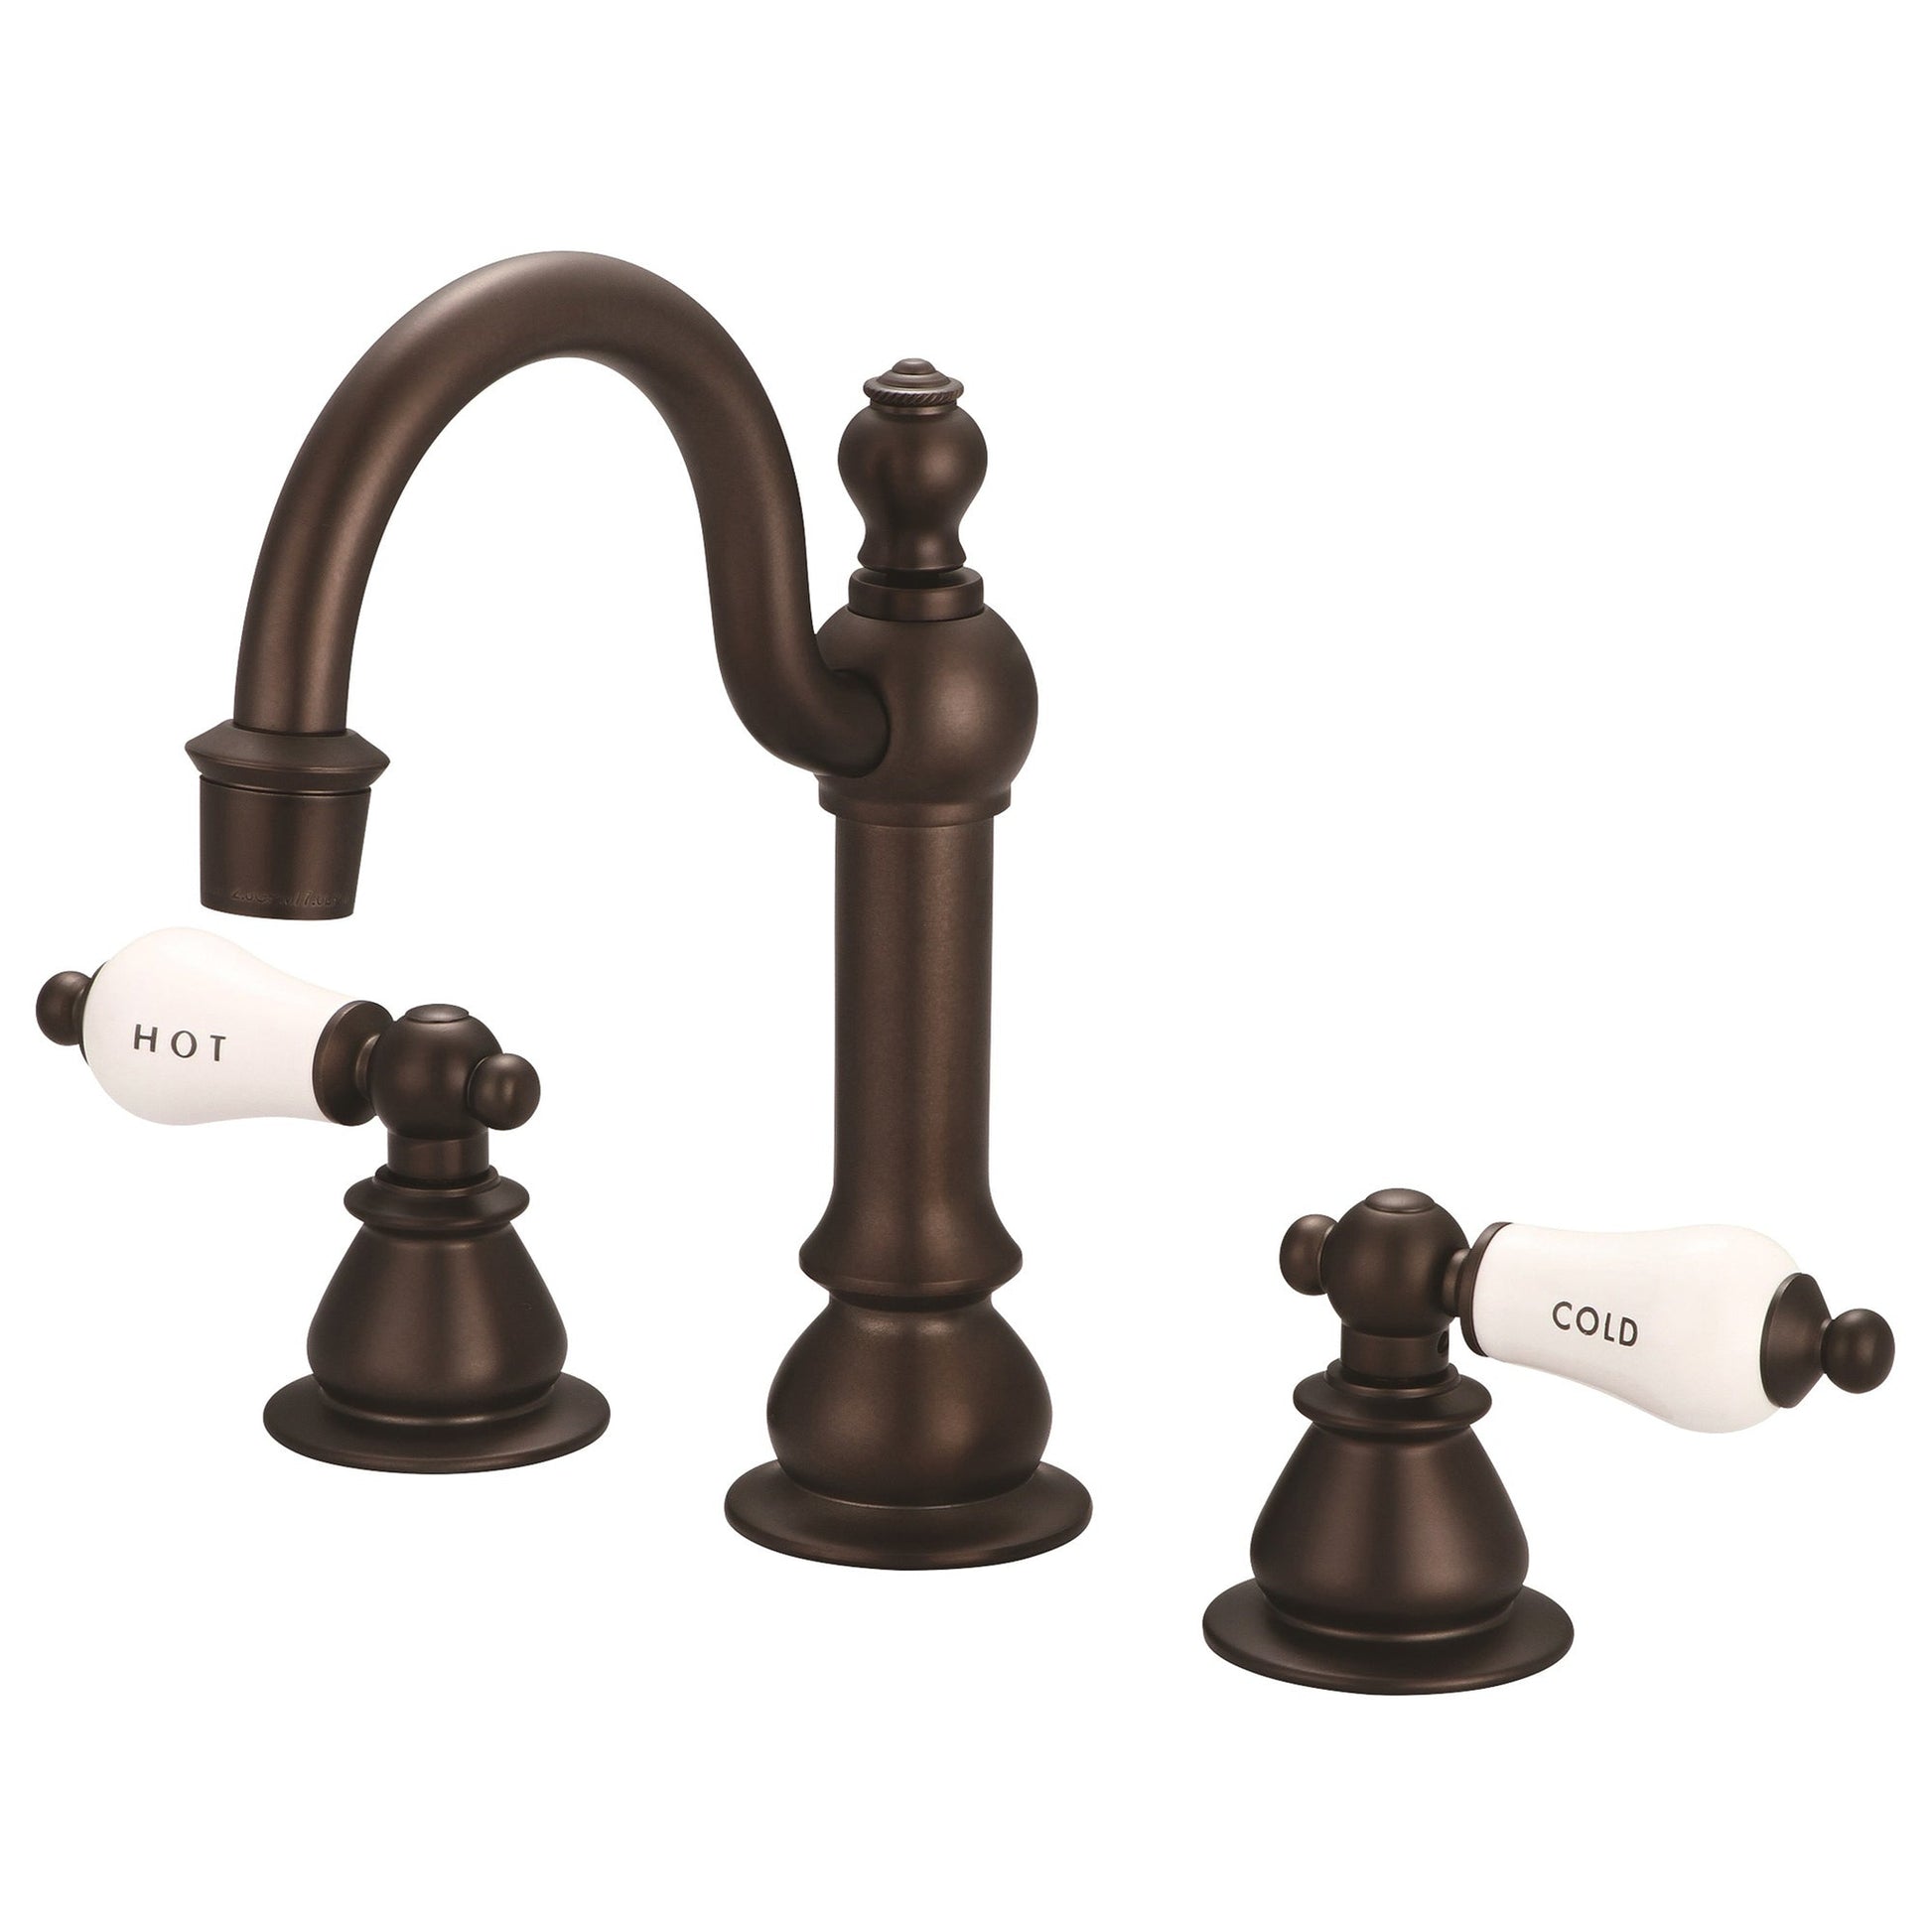 Water Creation American 20th Century Classic Widespread Lavatory F2-0012 8" Brown Solid Brass Faucet With Pop-Up Drain And Porcelain Lever Handles, Hot And Cold Labels Included